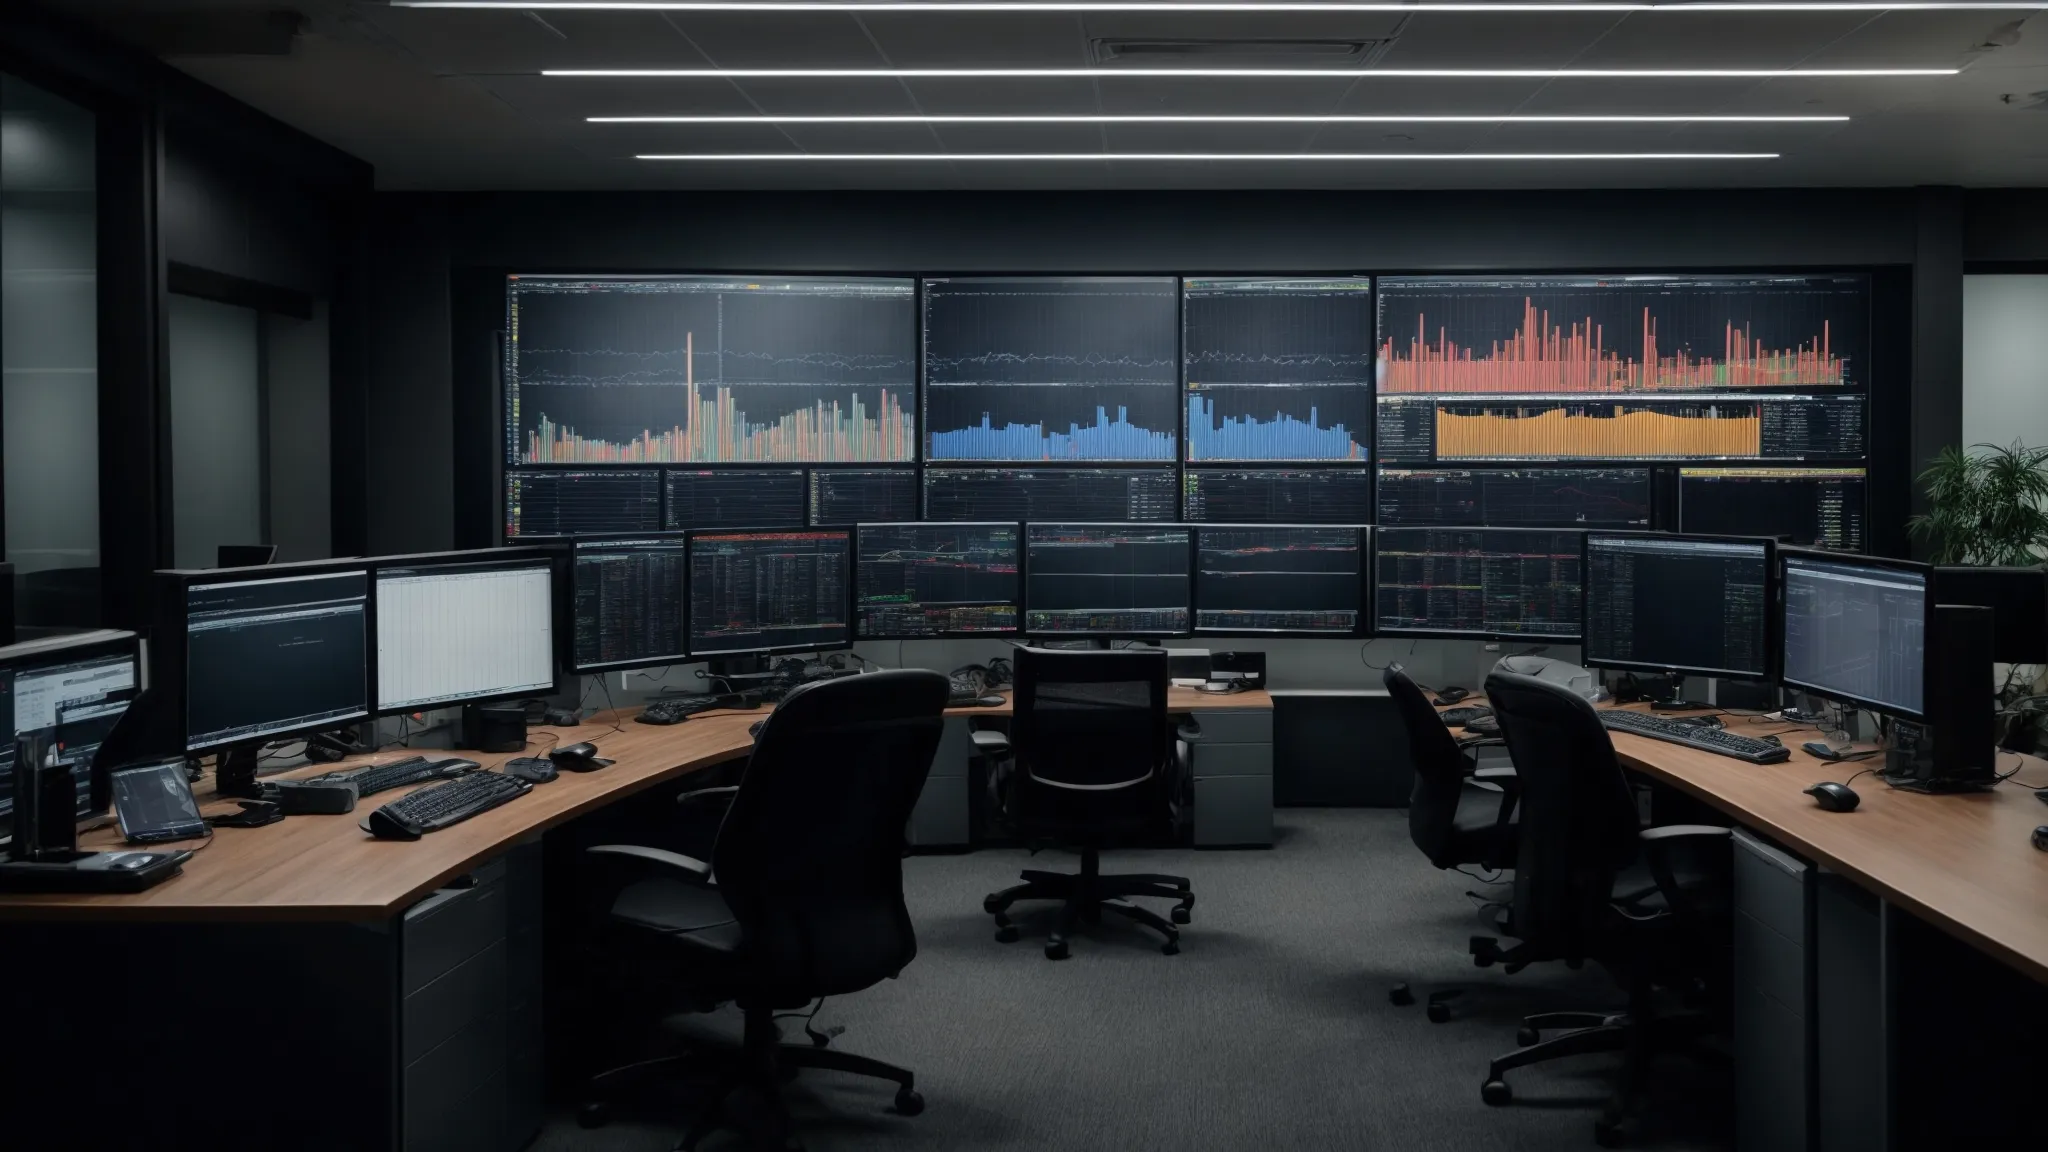 a panoramic office setting with multiple large computer monitors displaying complex website data analysis charts.